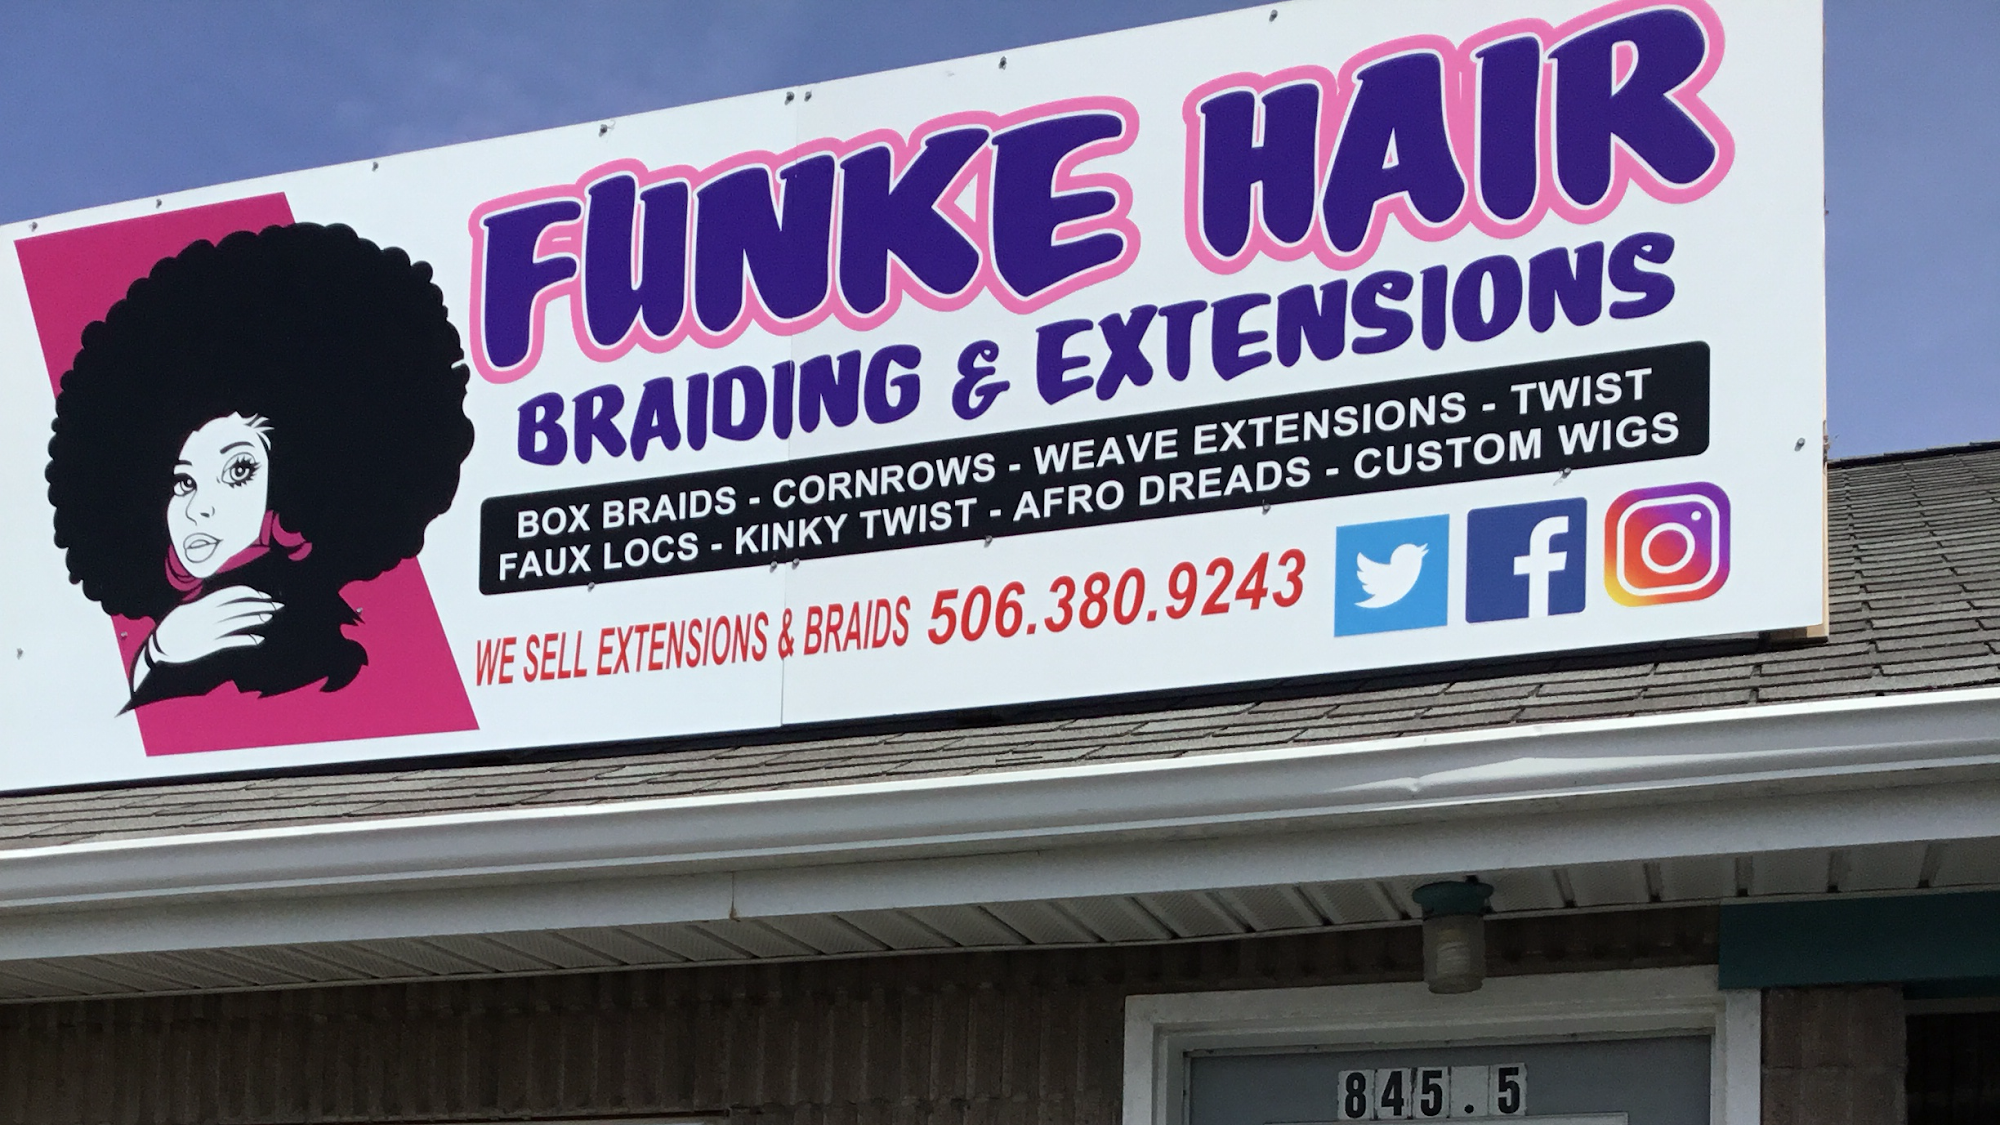 Funke Hair Braiding and Extensions